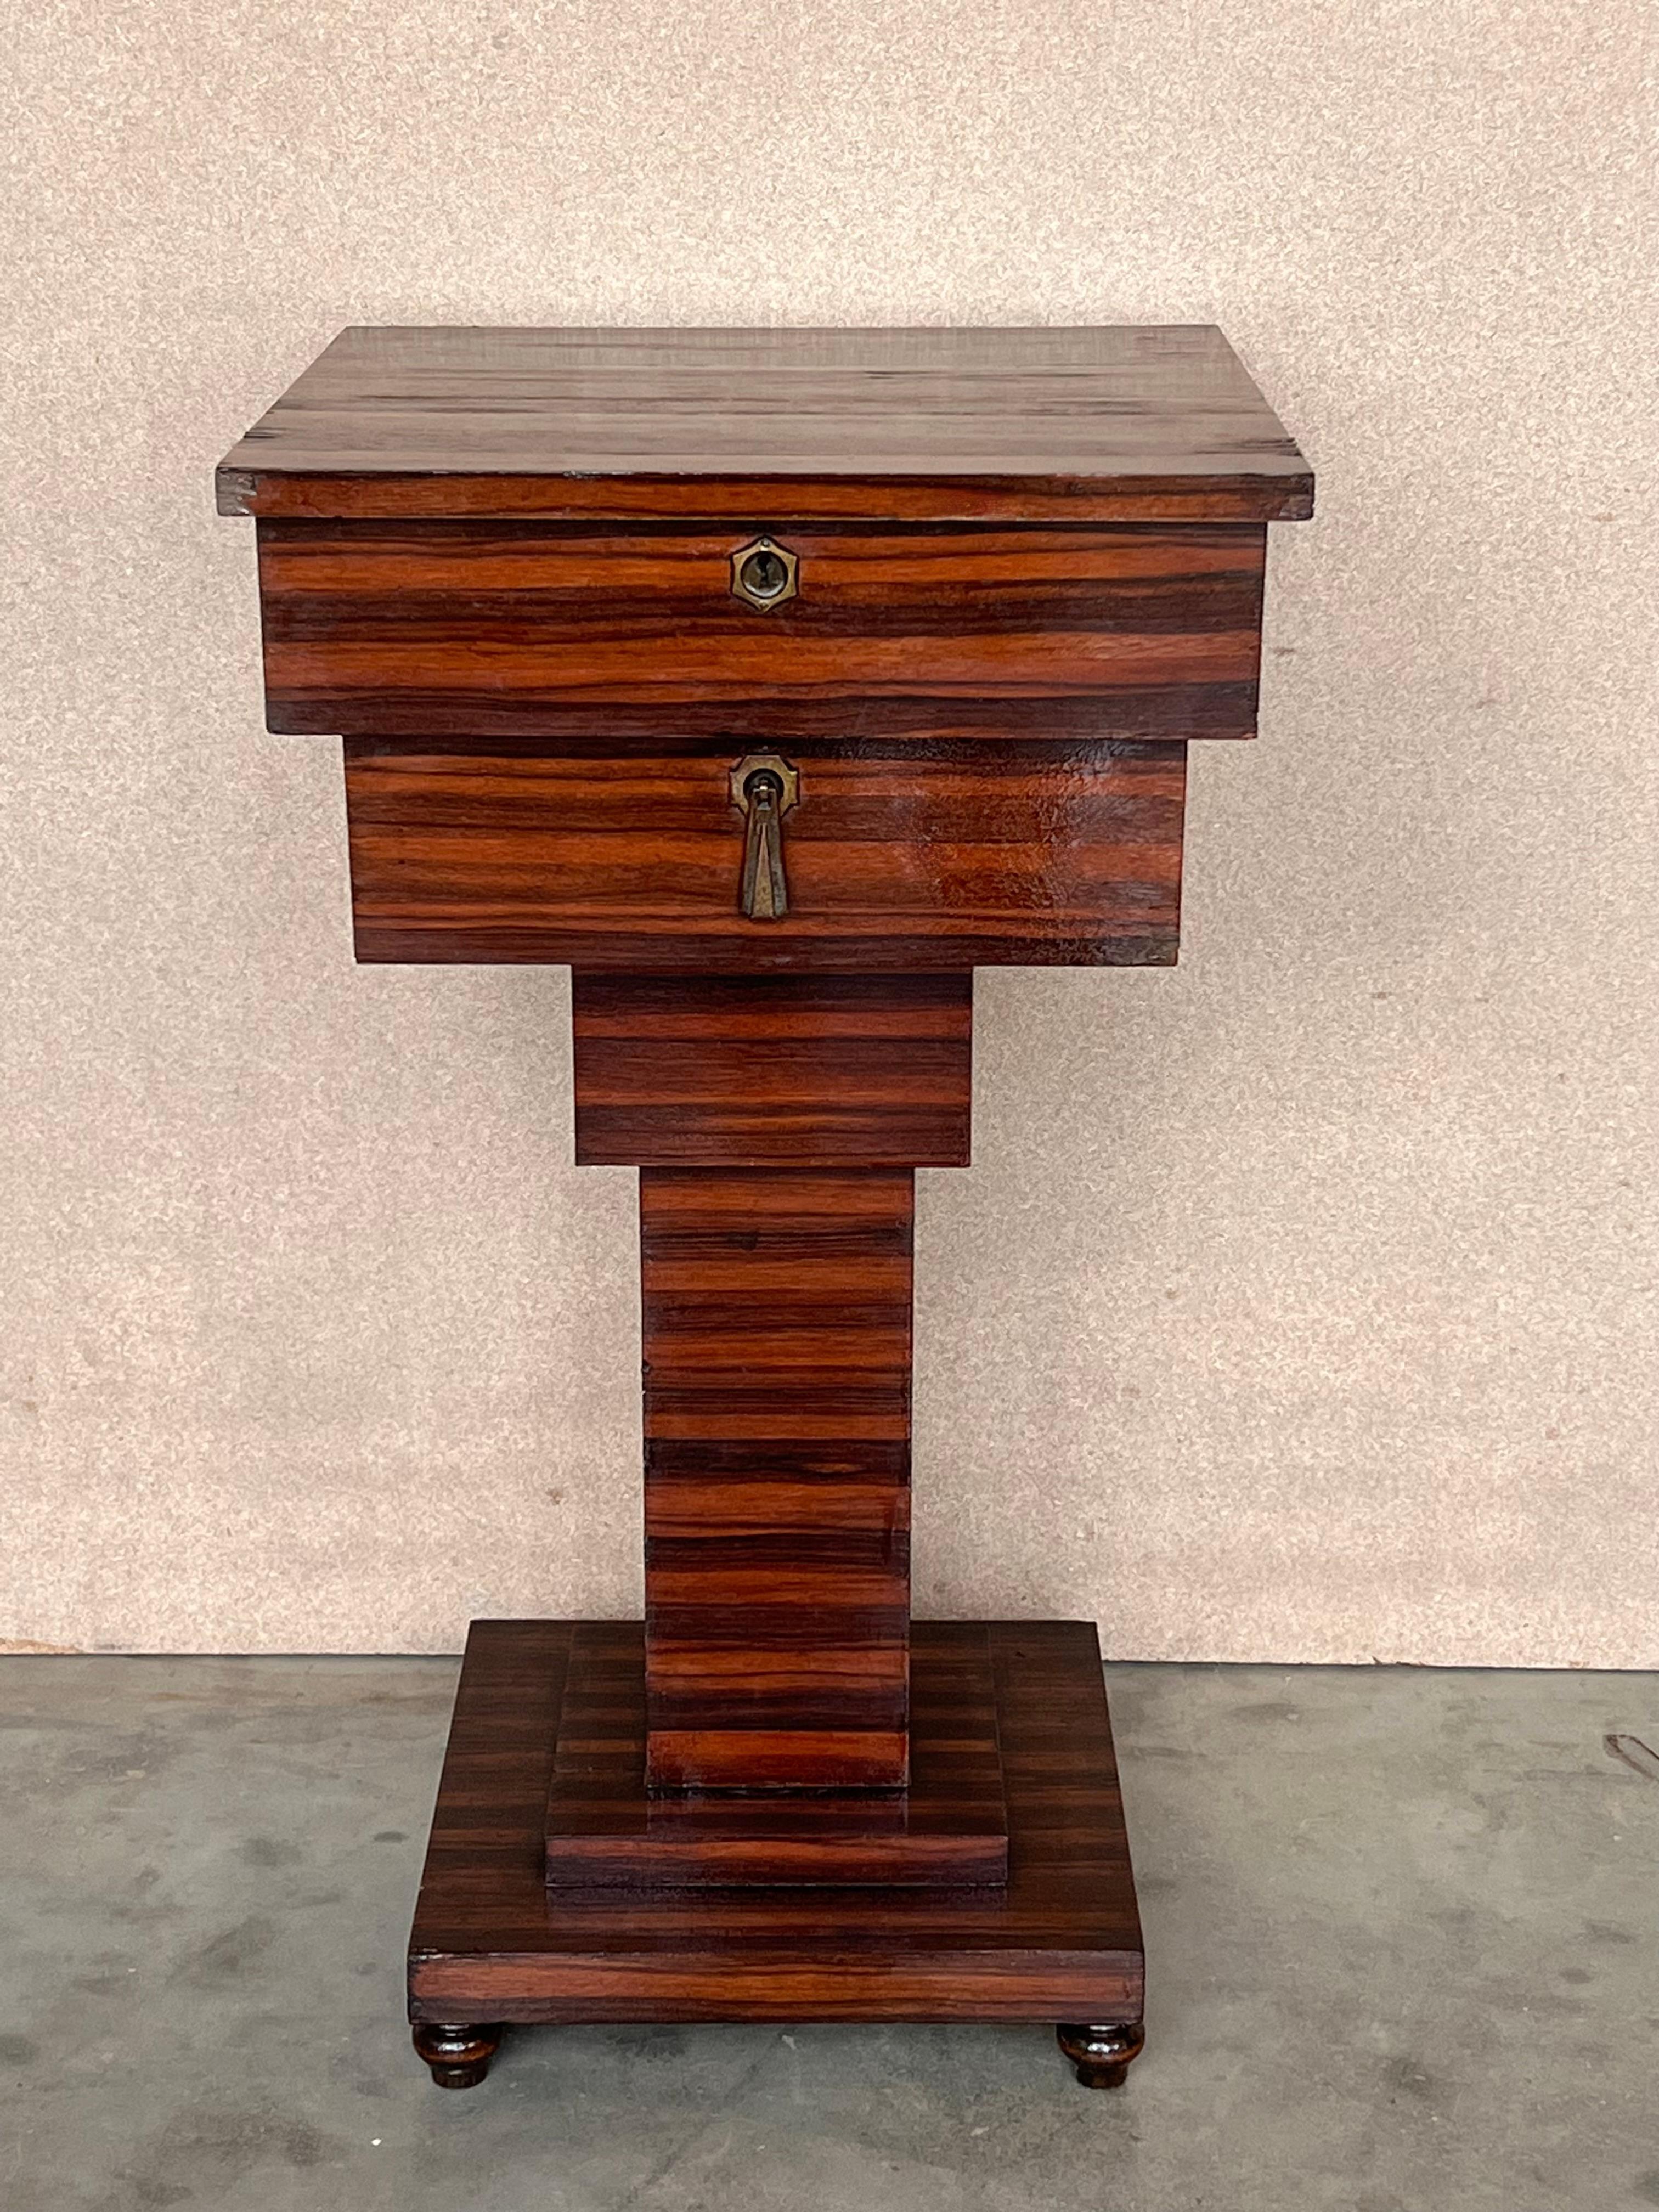 Mahogany Art Deco Sewing or Jelwery Box on Stand, circa 1960